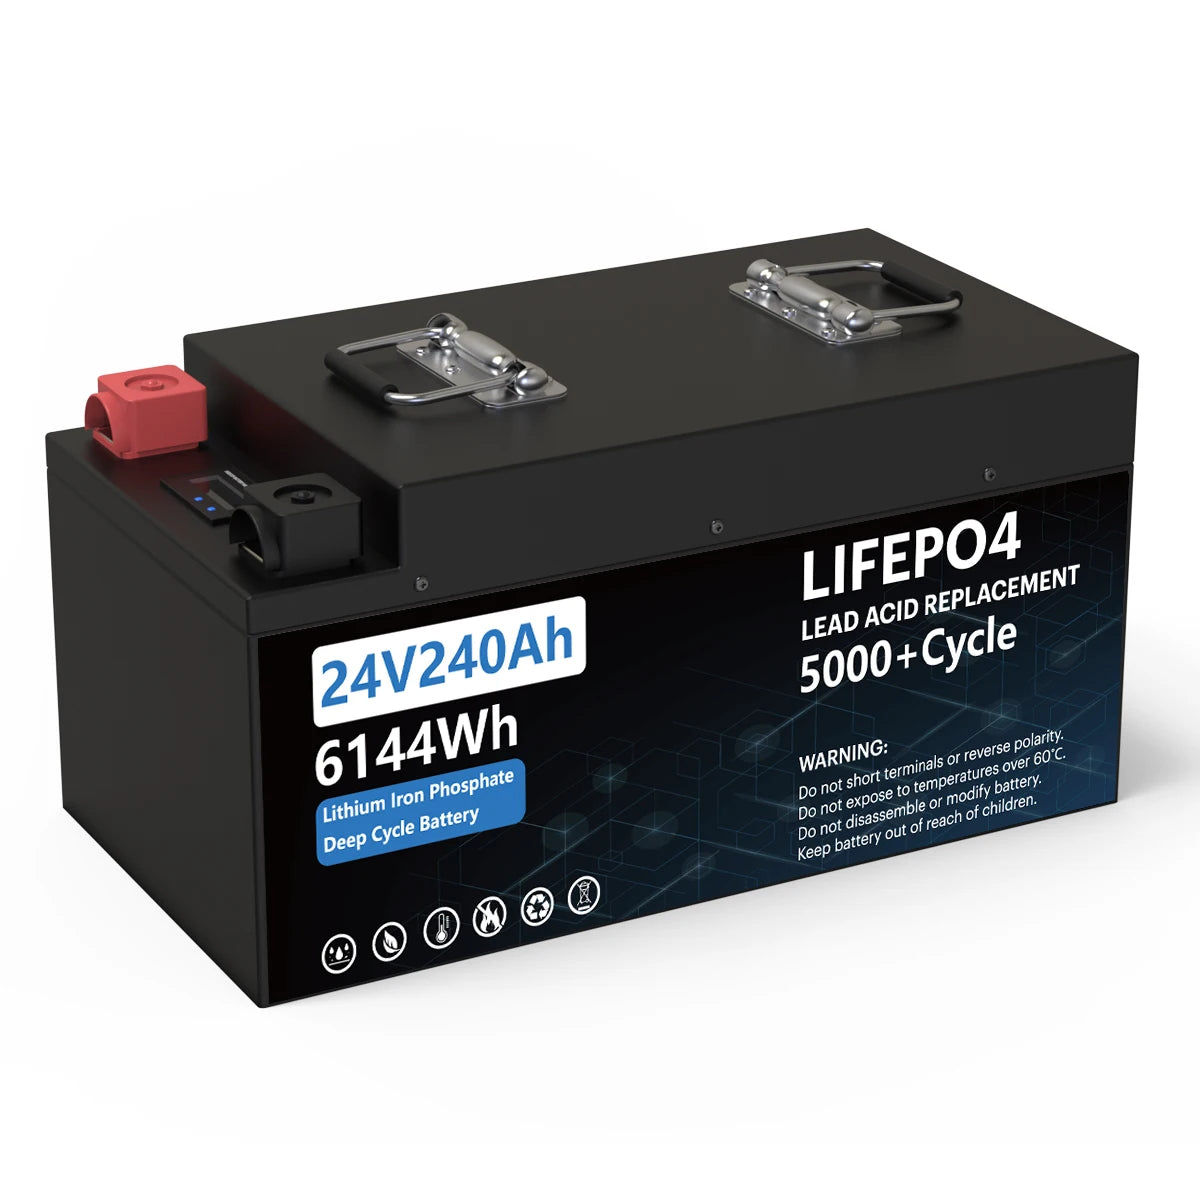 LiFePO4 24V 200AH Battery, Lithium Iron Phosphate battery storage and handling instructions.